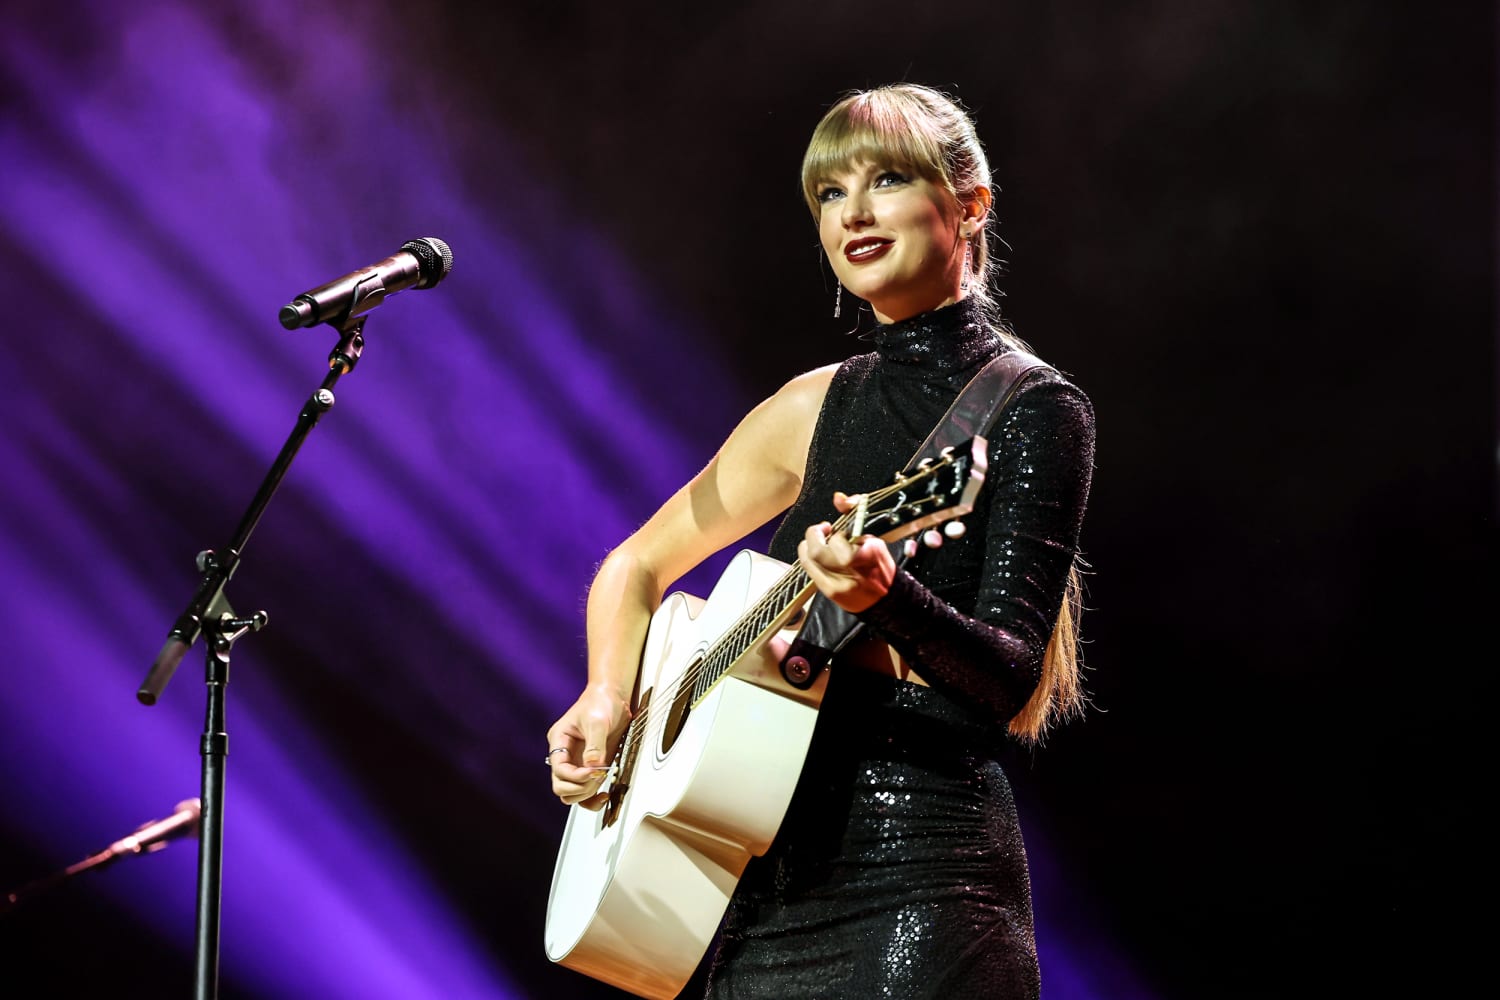 Ticket sales for Taylor Swift reignite fan frustration over Ticketmaster